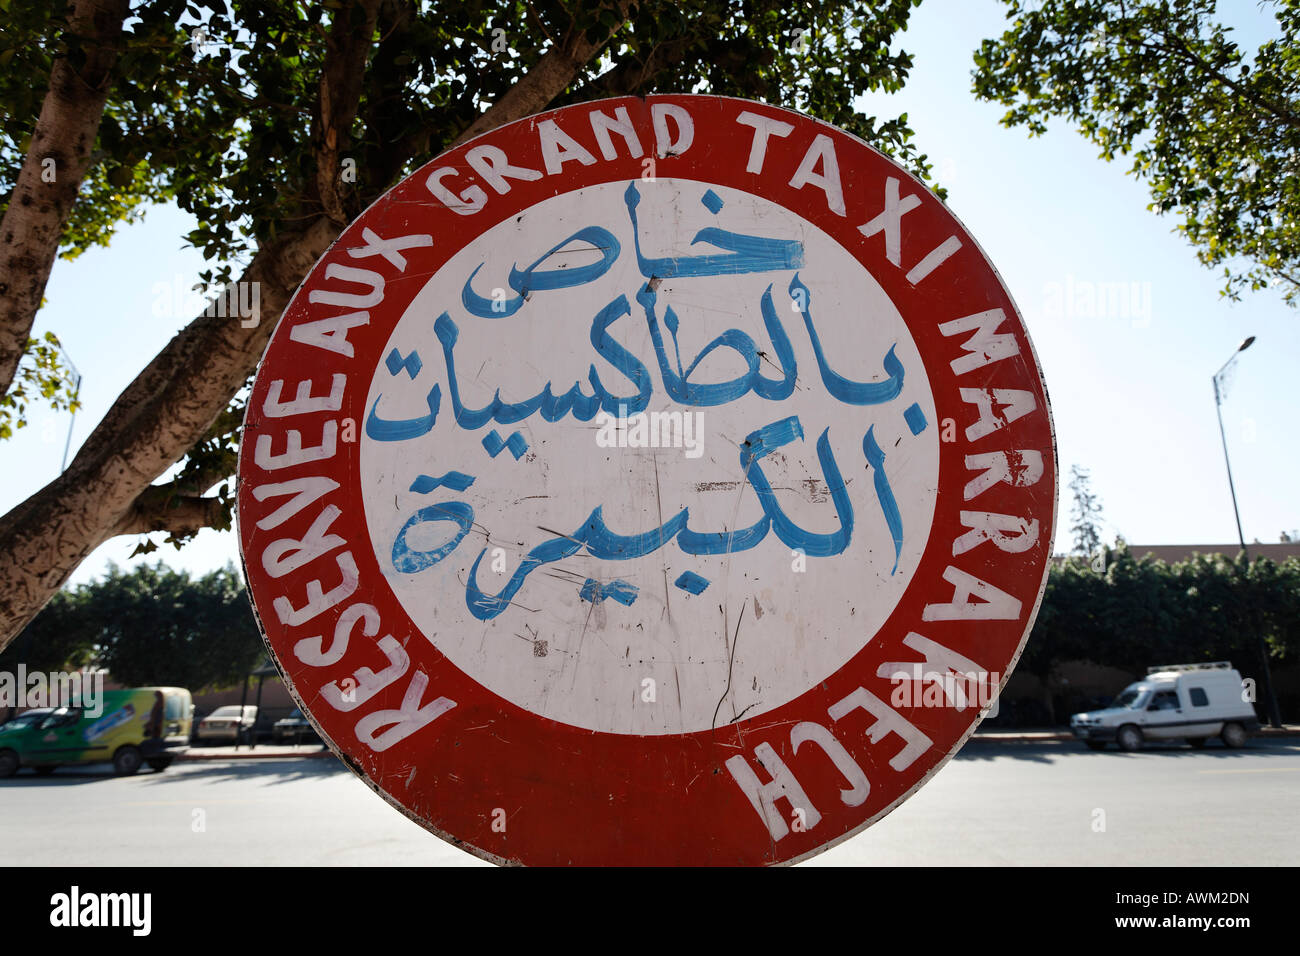 No-parking sign, parking spaces reserved for Grand Taxi, , Marrakesh, Morocco, Africa Stock Photo